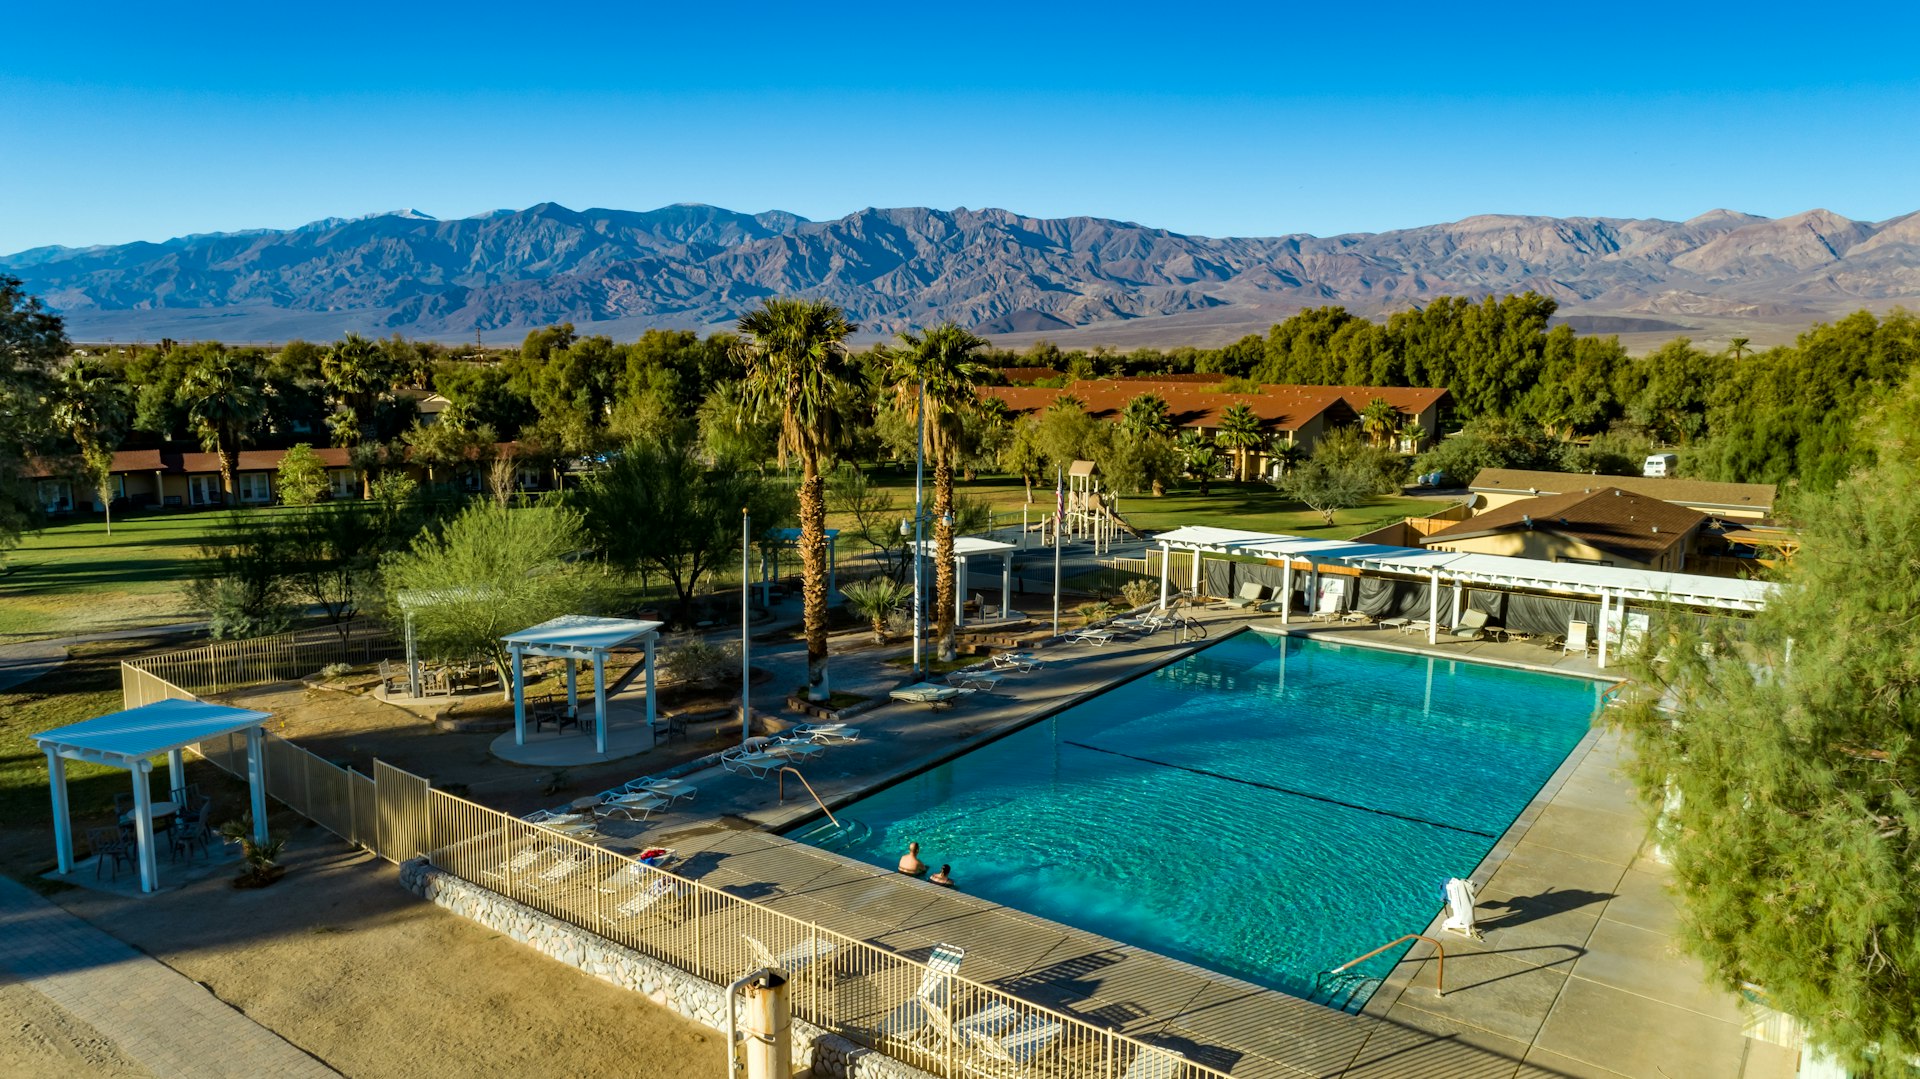 An overview of the pool at The Ranch at Death Valley, California 